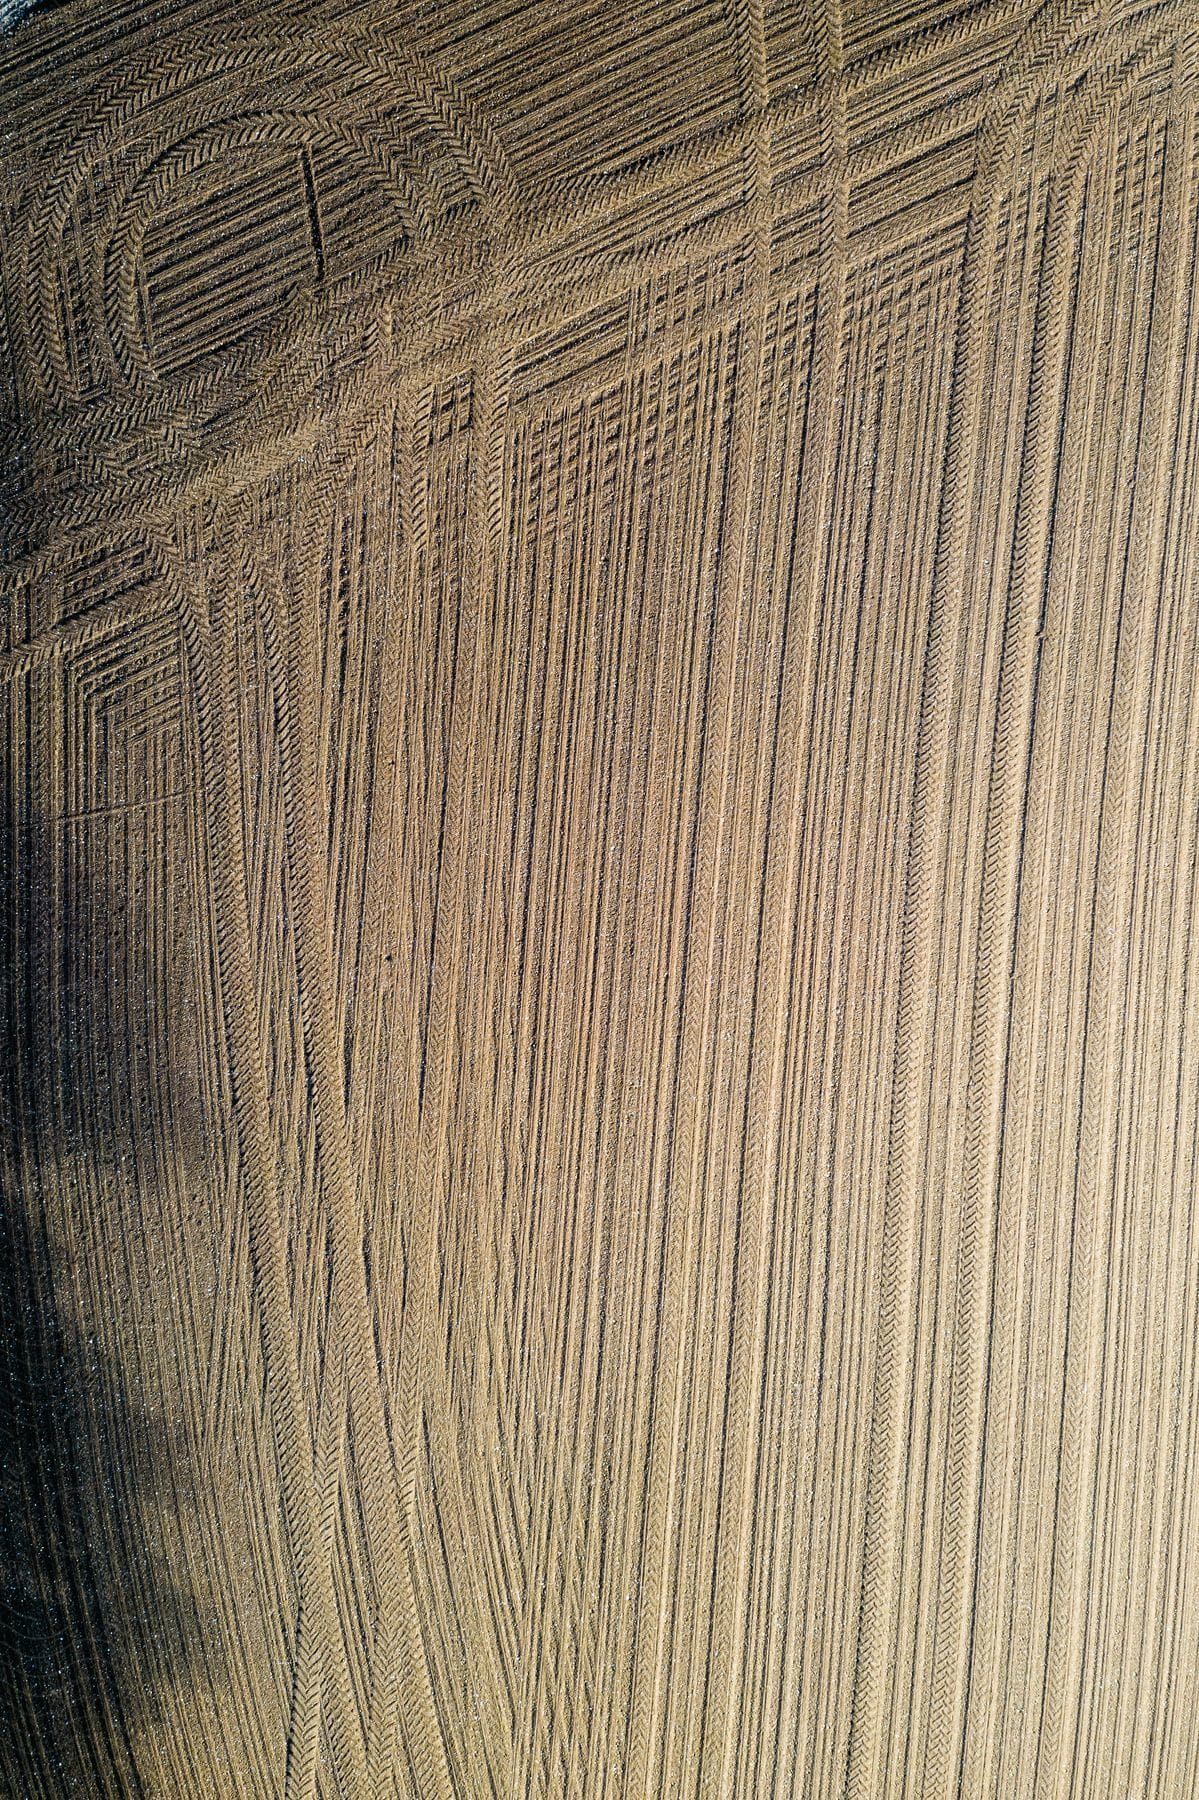 Aerial view of a freshly plowed farm field with crisscrossing tire tracks on brown soil